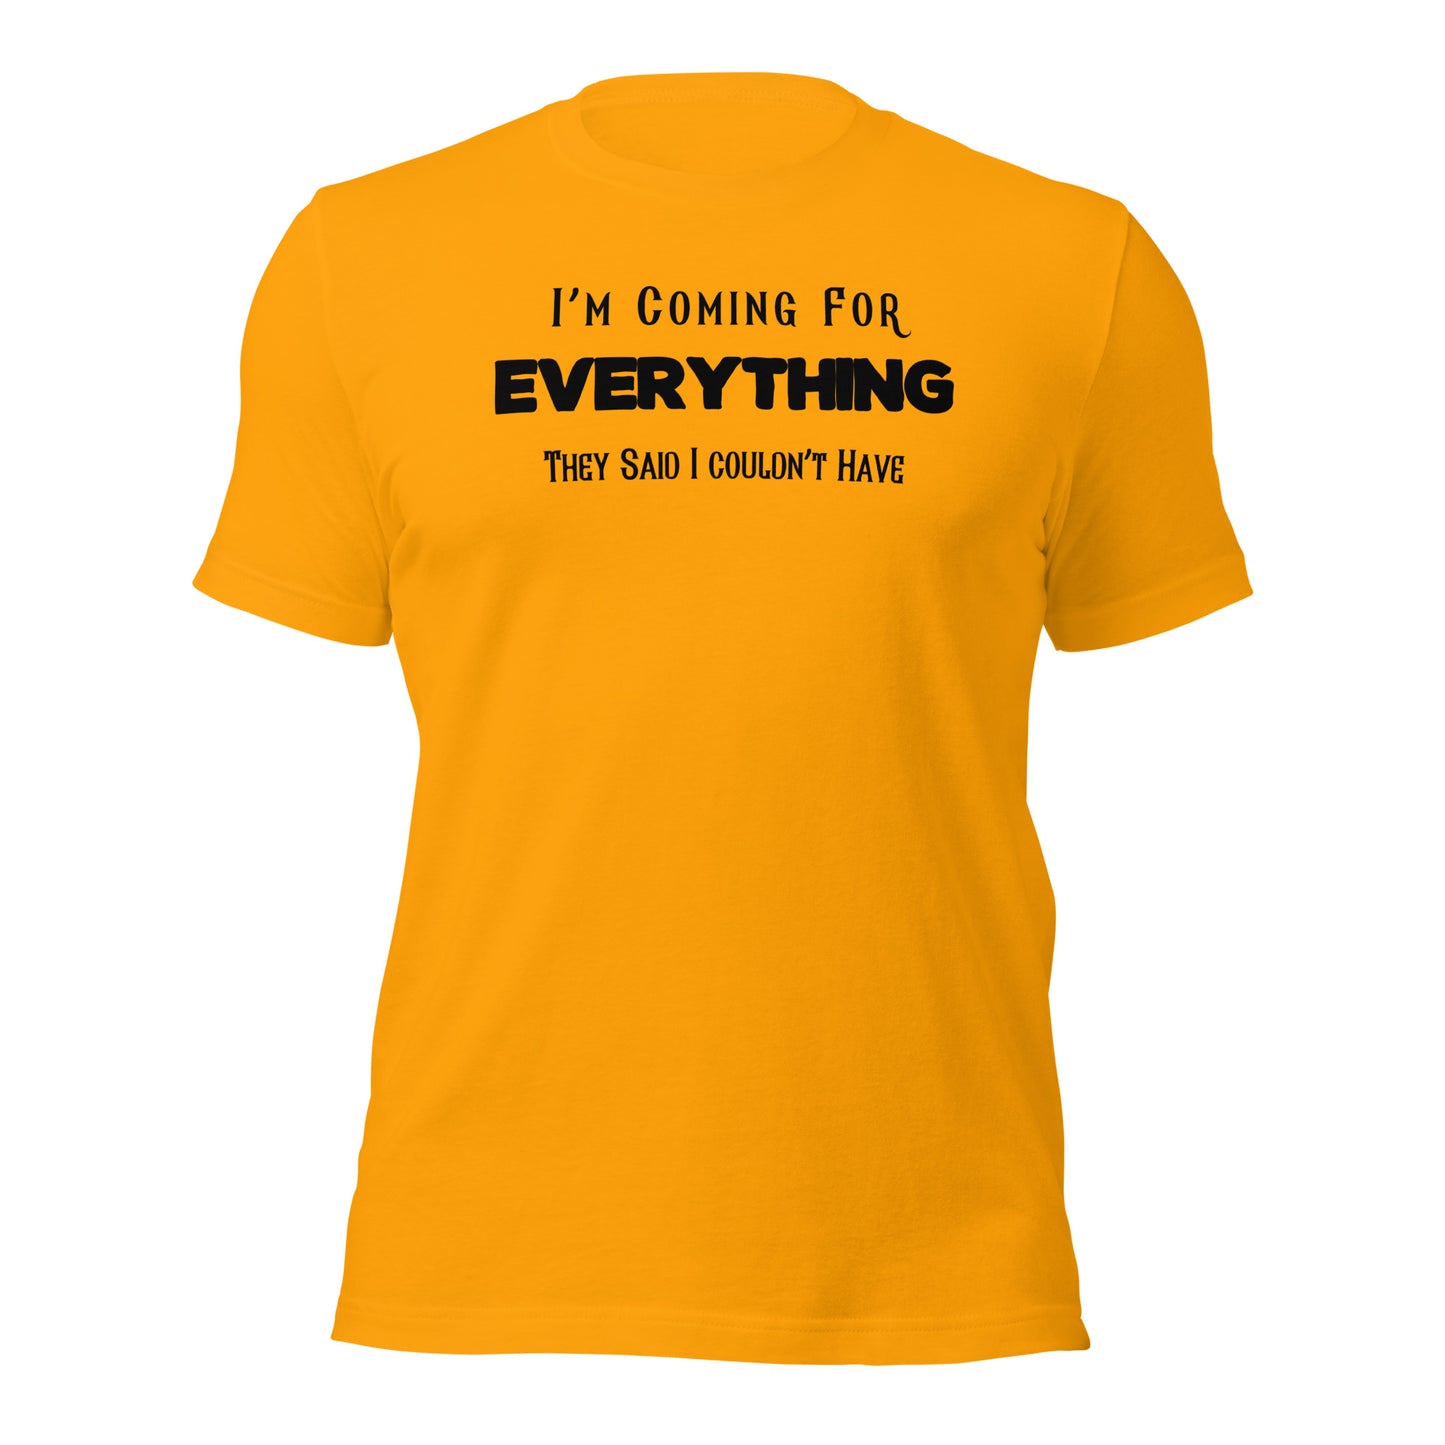 "I'm Coming For Everything They Said I Couldn't Have" T-Shirt - Weave Got Gifts - Unique Gifts You Won’t Find Anywhere Else!